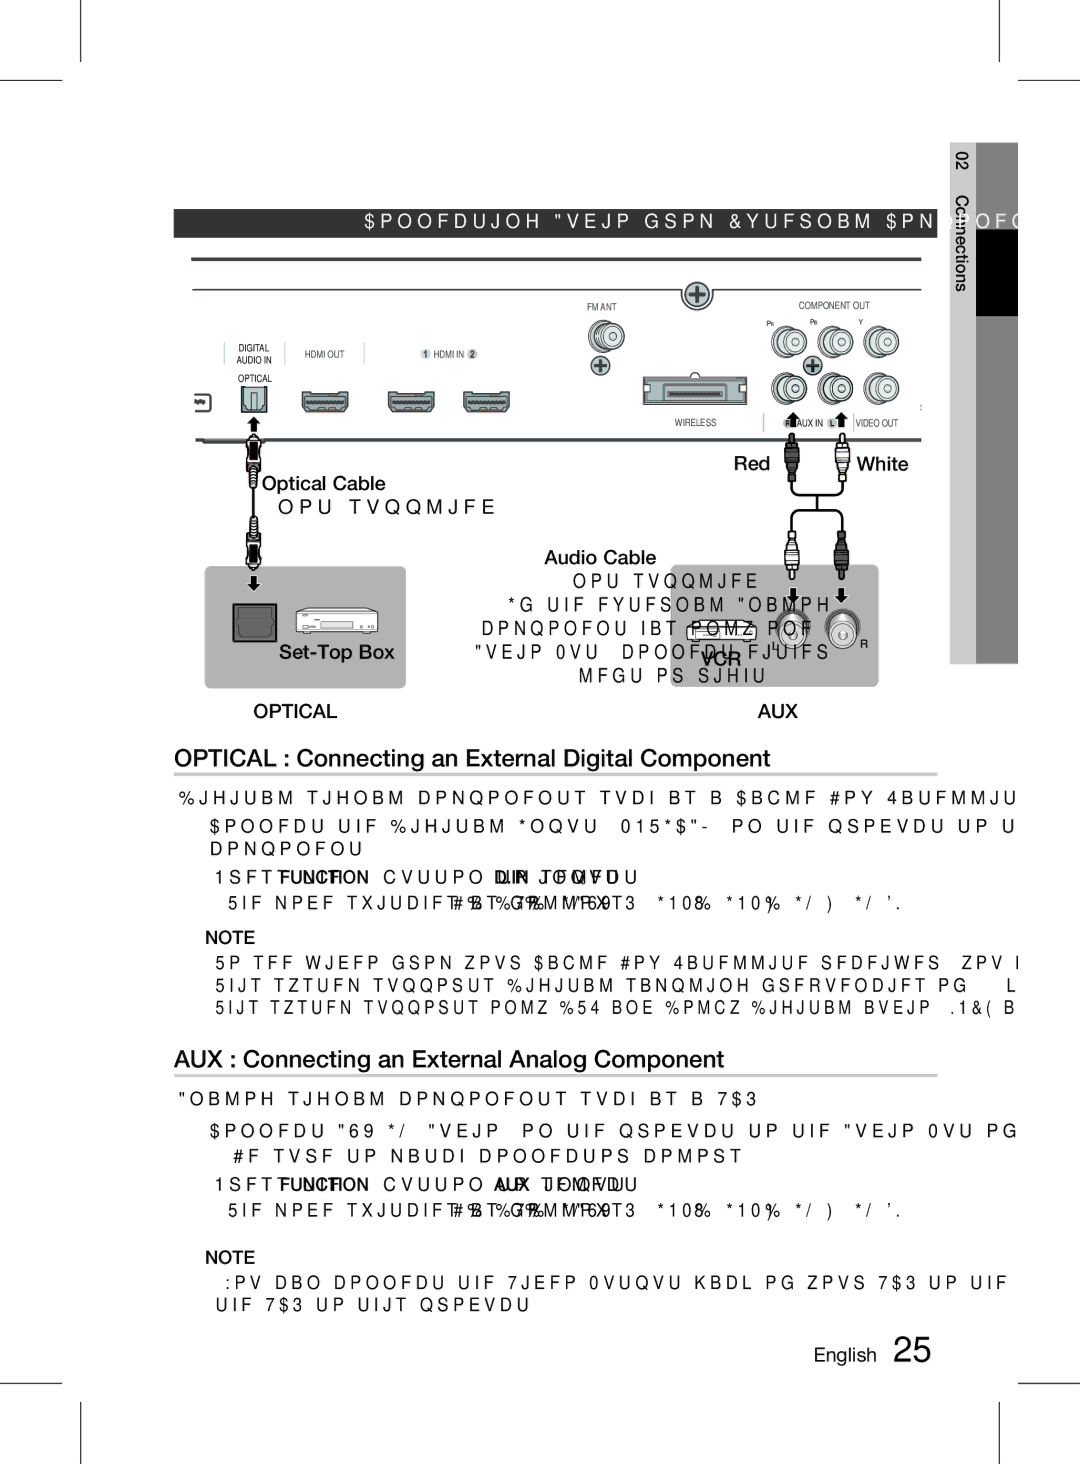 Samsung HT-D6750WK/SQ manual Optical Connecting an External Digital Component, AUX Connecting an External Analog Component 